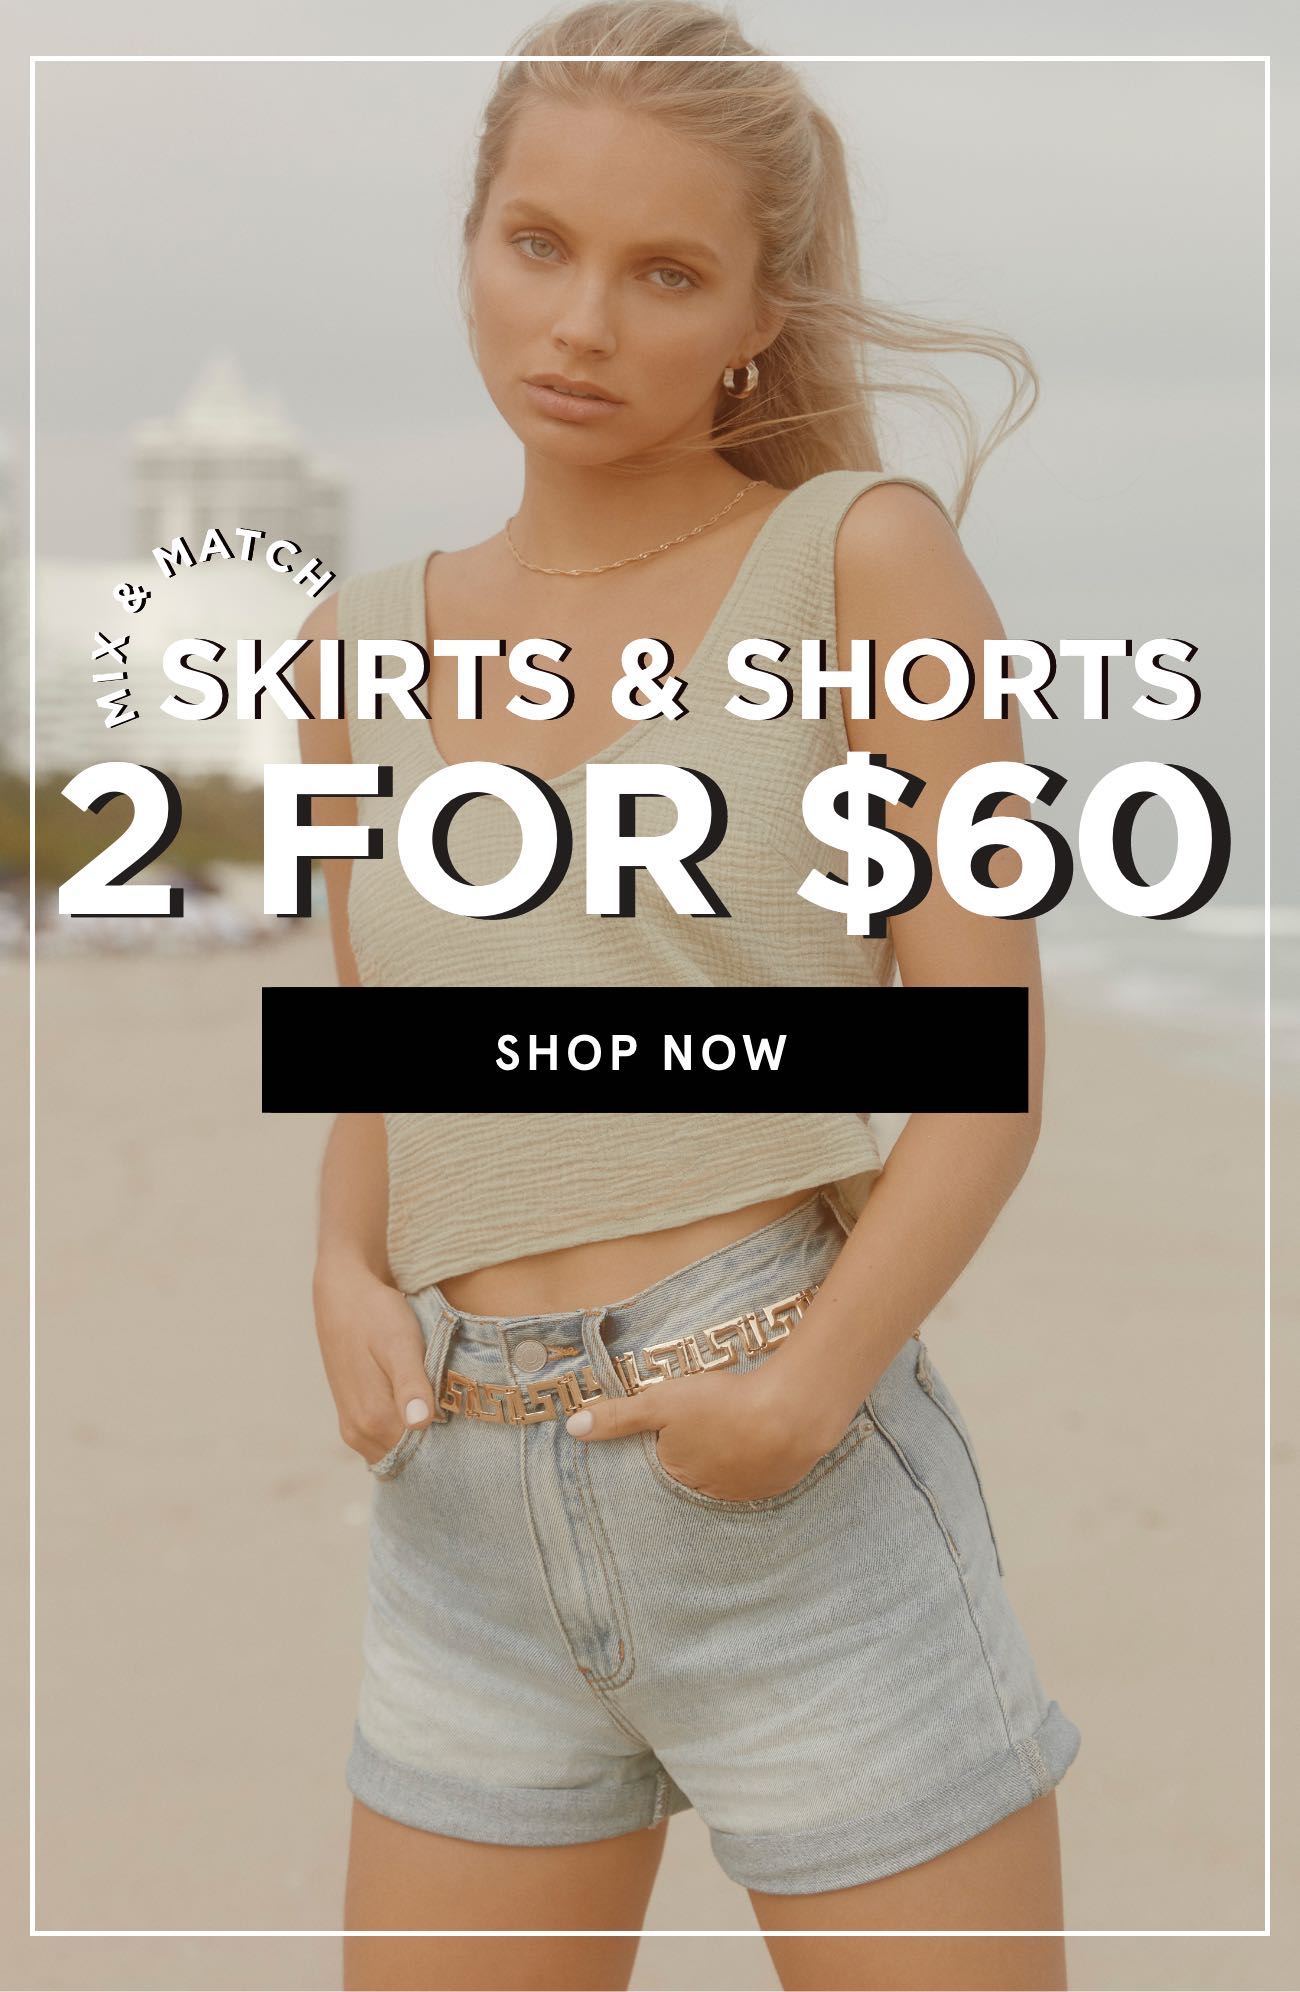 Shop 2 for $60 Shorts and Skirts